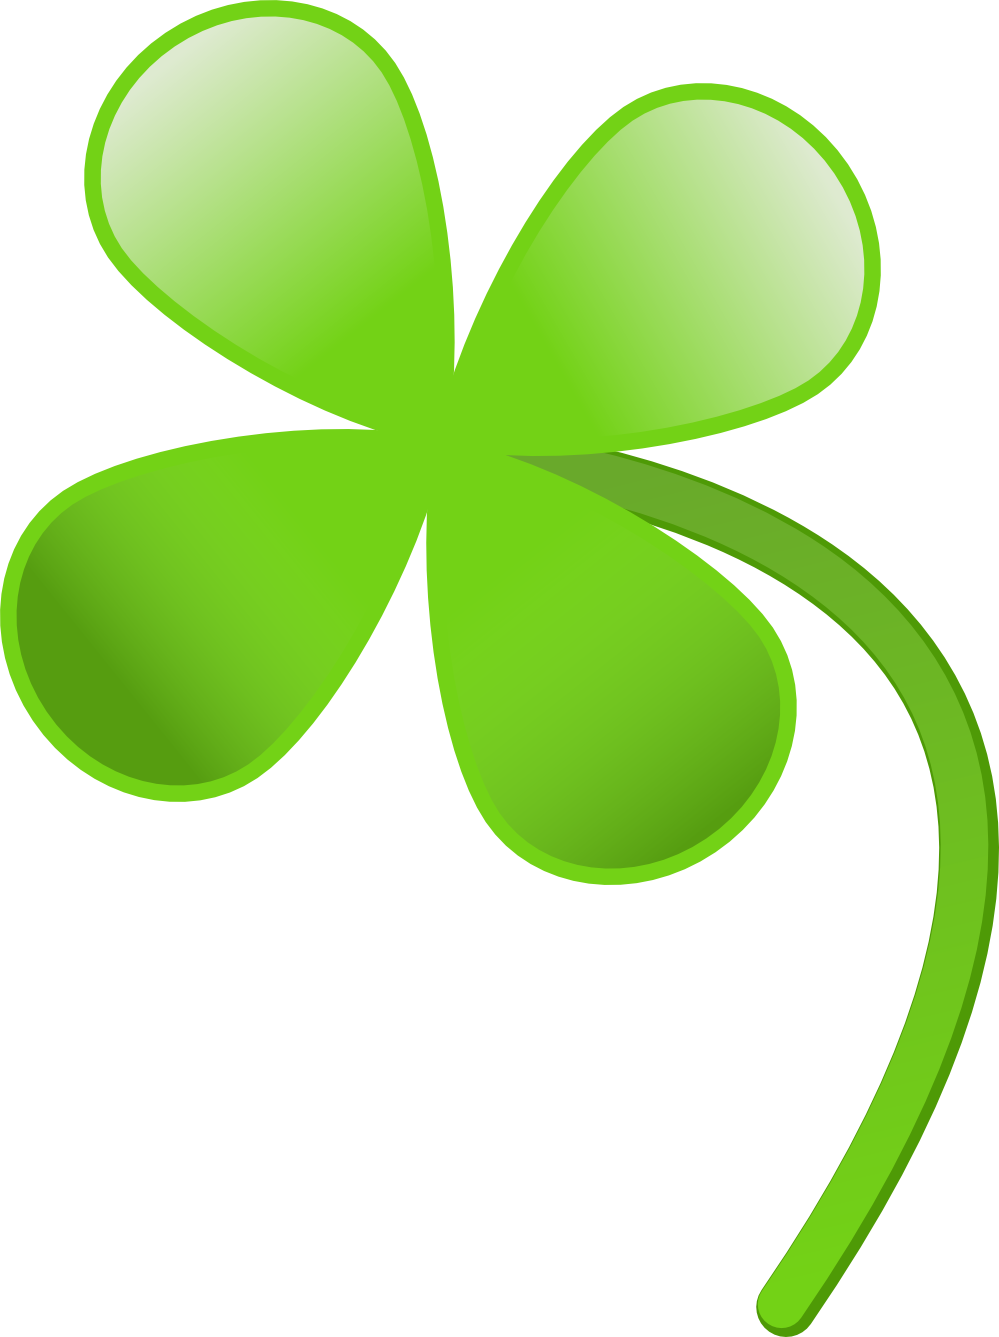 Clover Free Download PNG Image